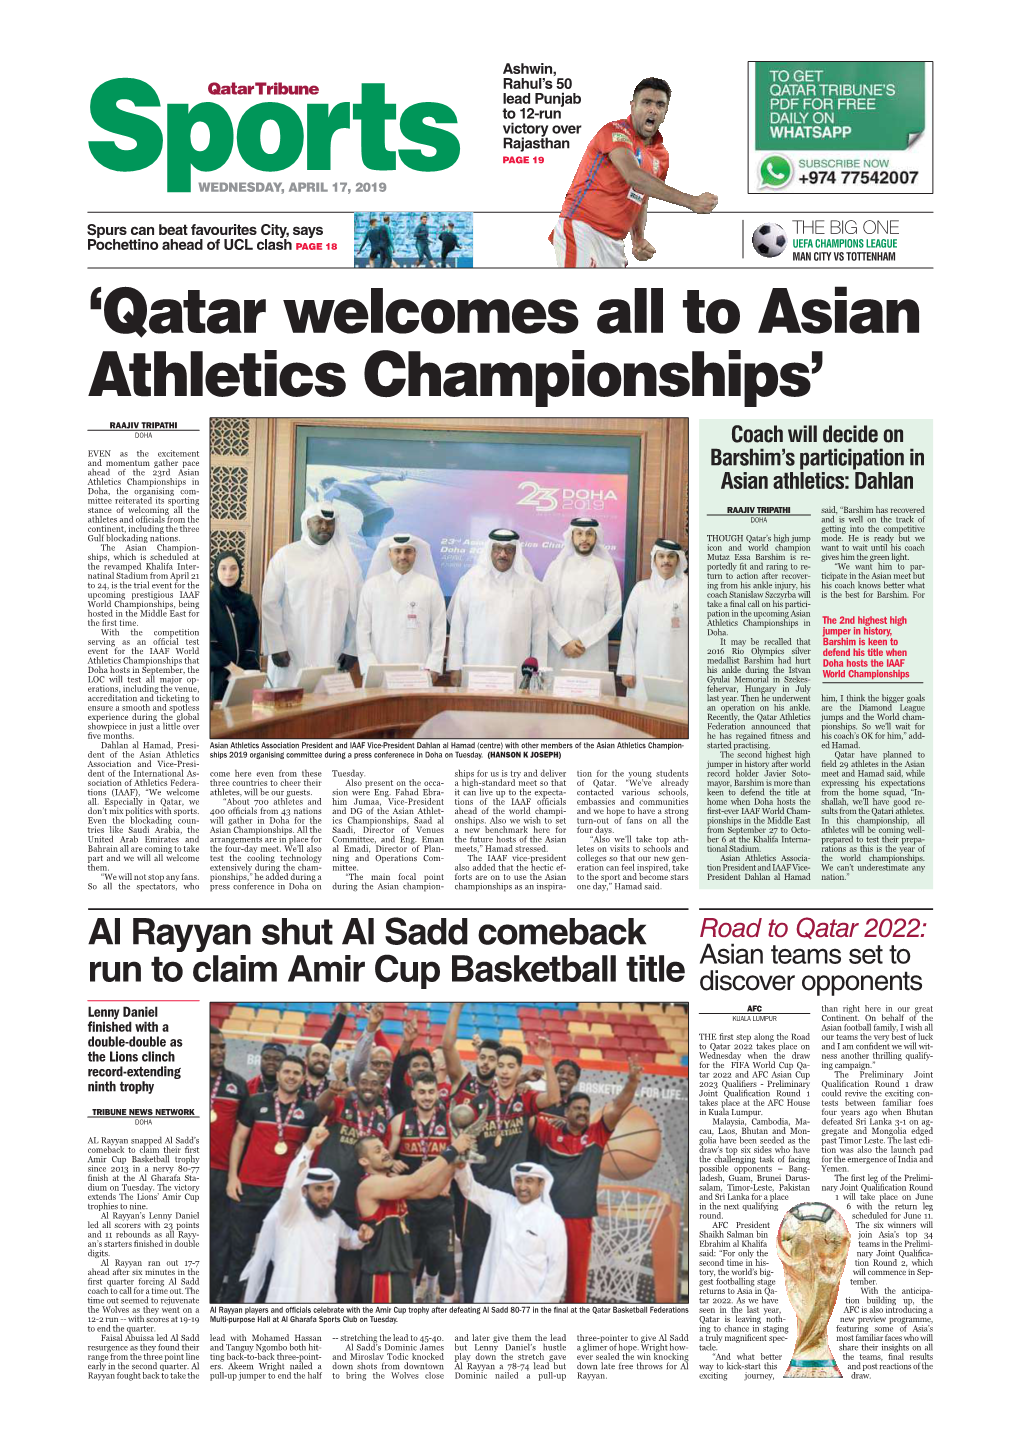 'Qatar Welcomes All to Asian Athletics Championships'